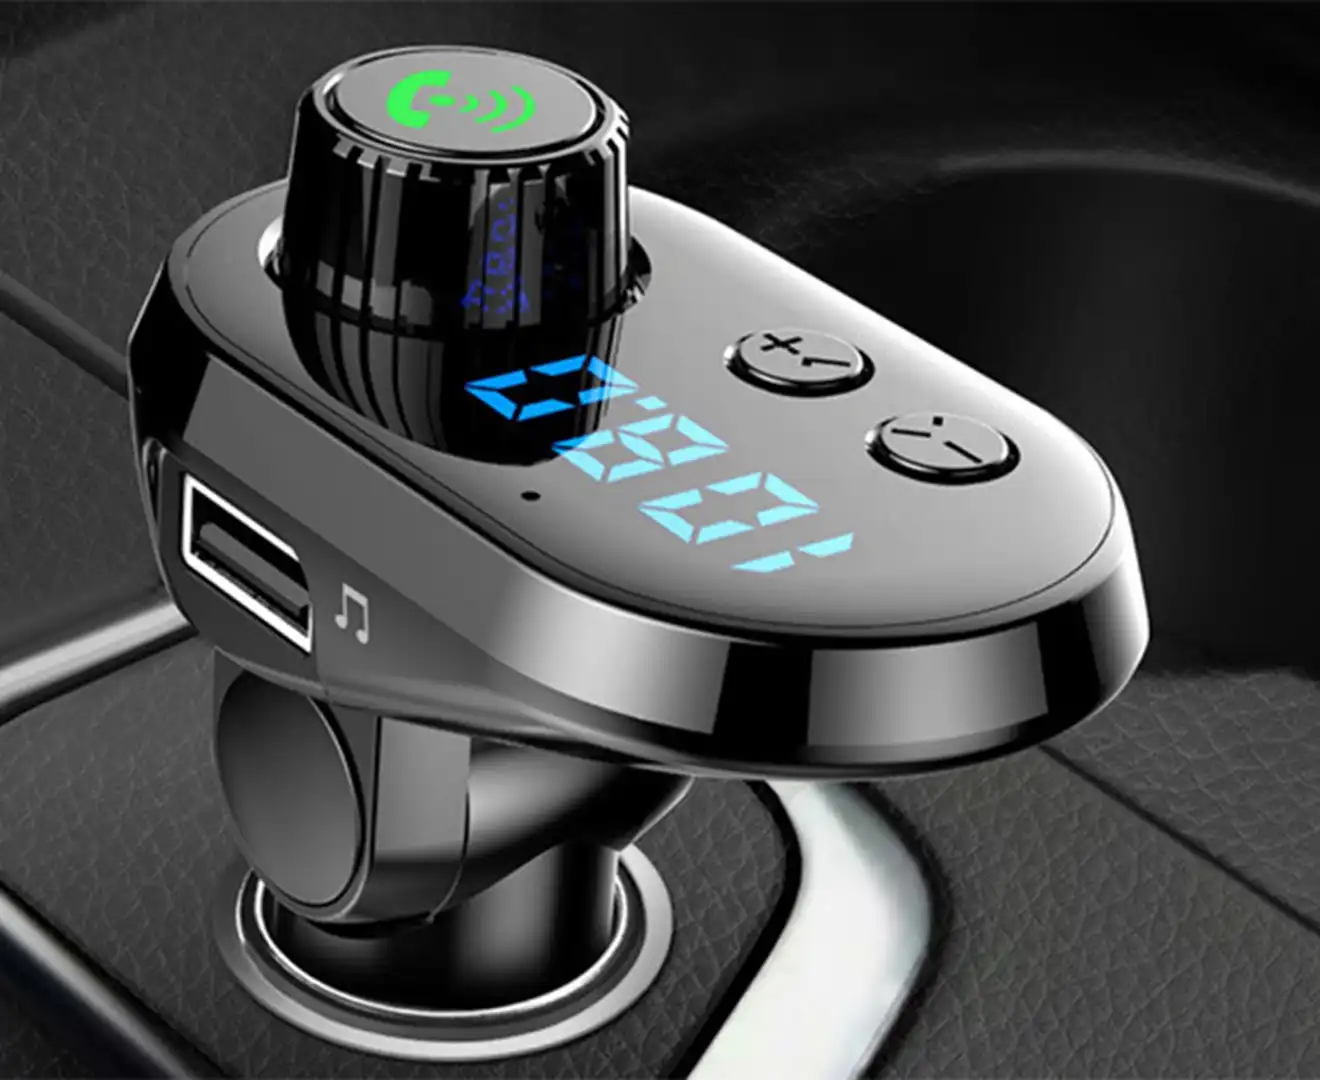 Hands-Free Bluetooth FM Transmitter Car Kit with three charging ports